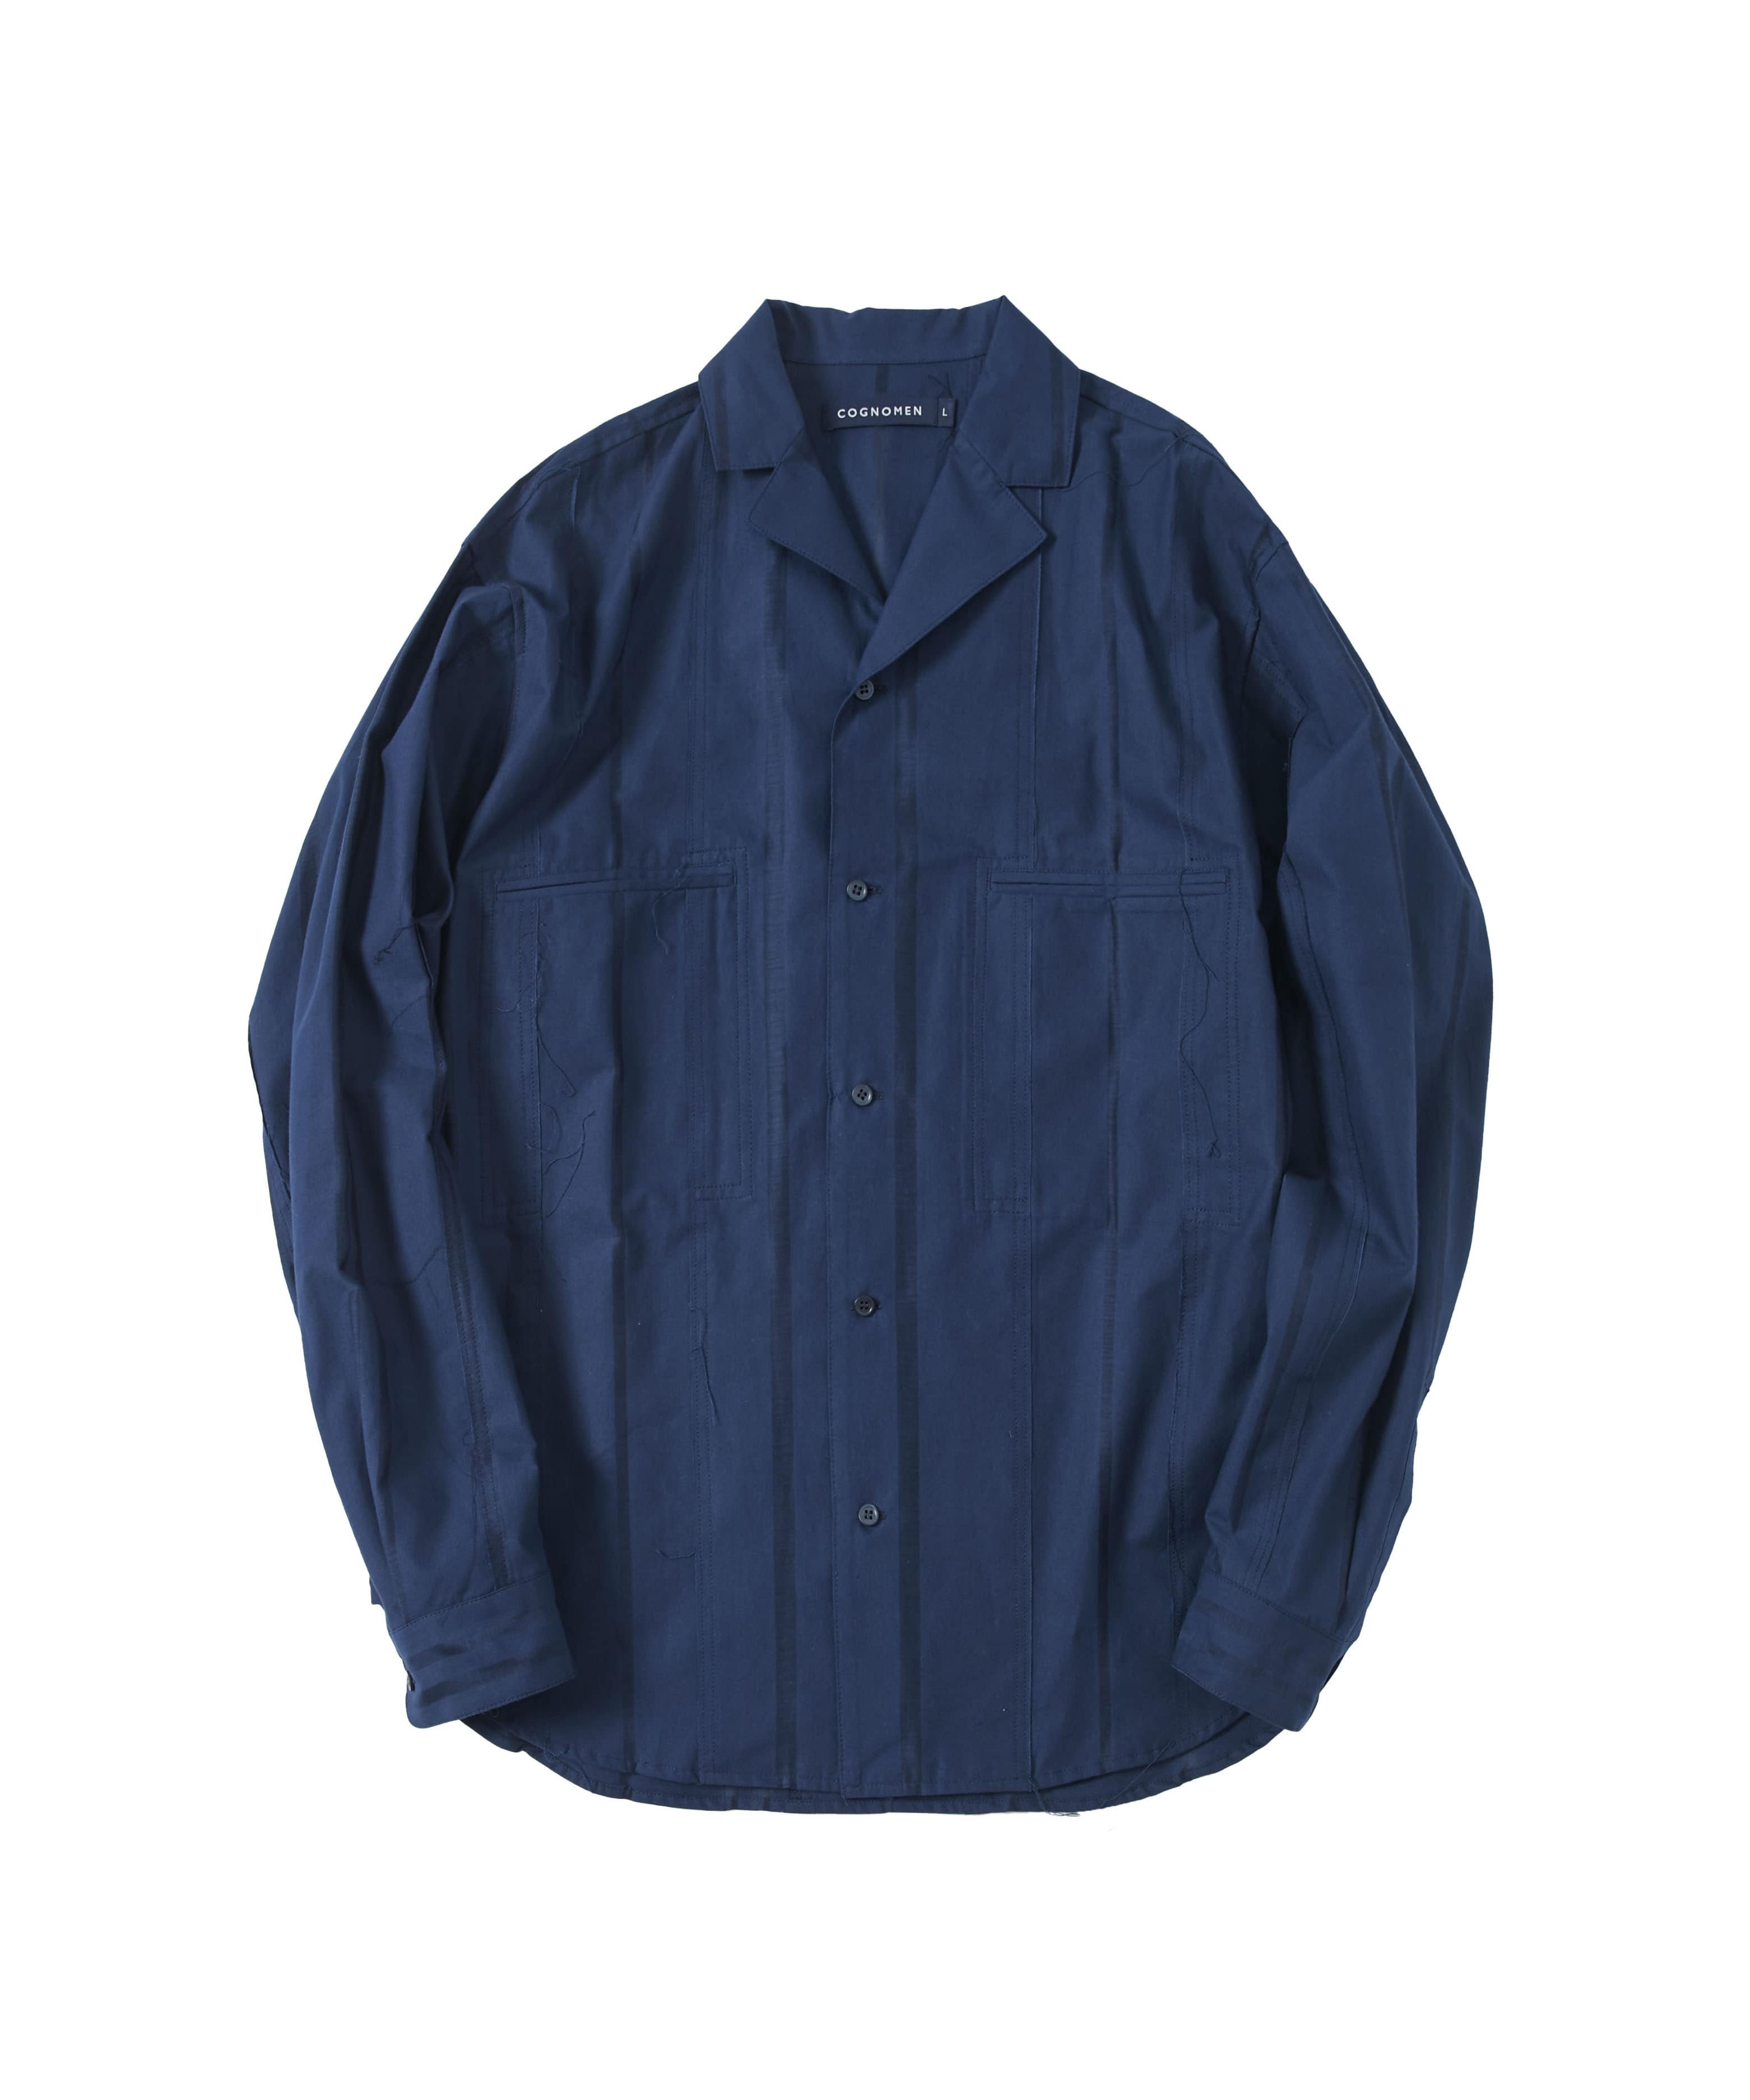 RE-TRADITION OPEN COLLAR SHIRT